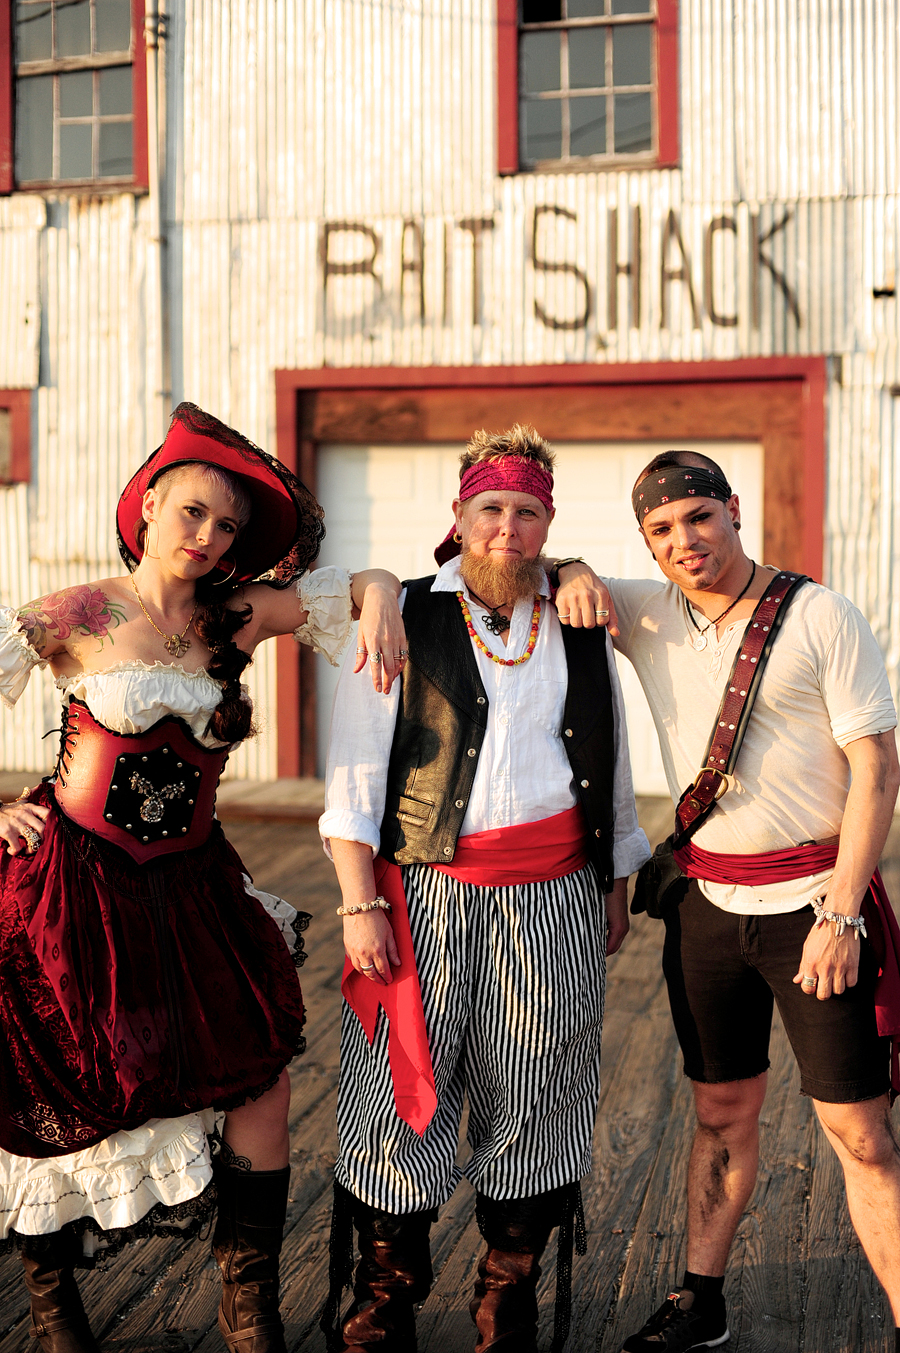 pirates posing by the bait shack